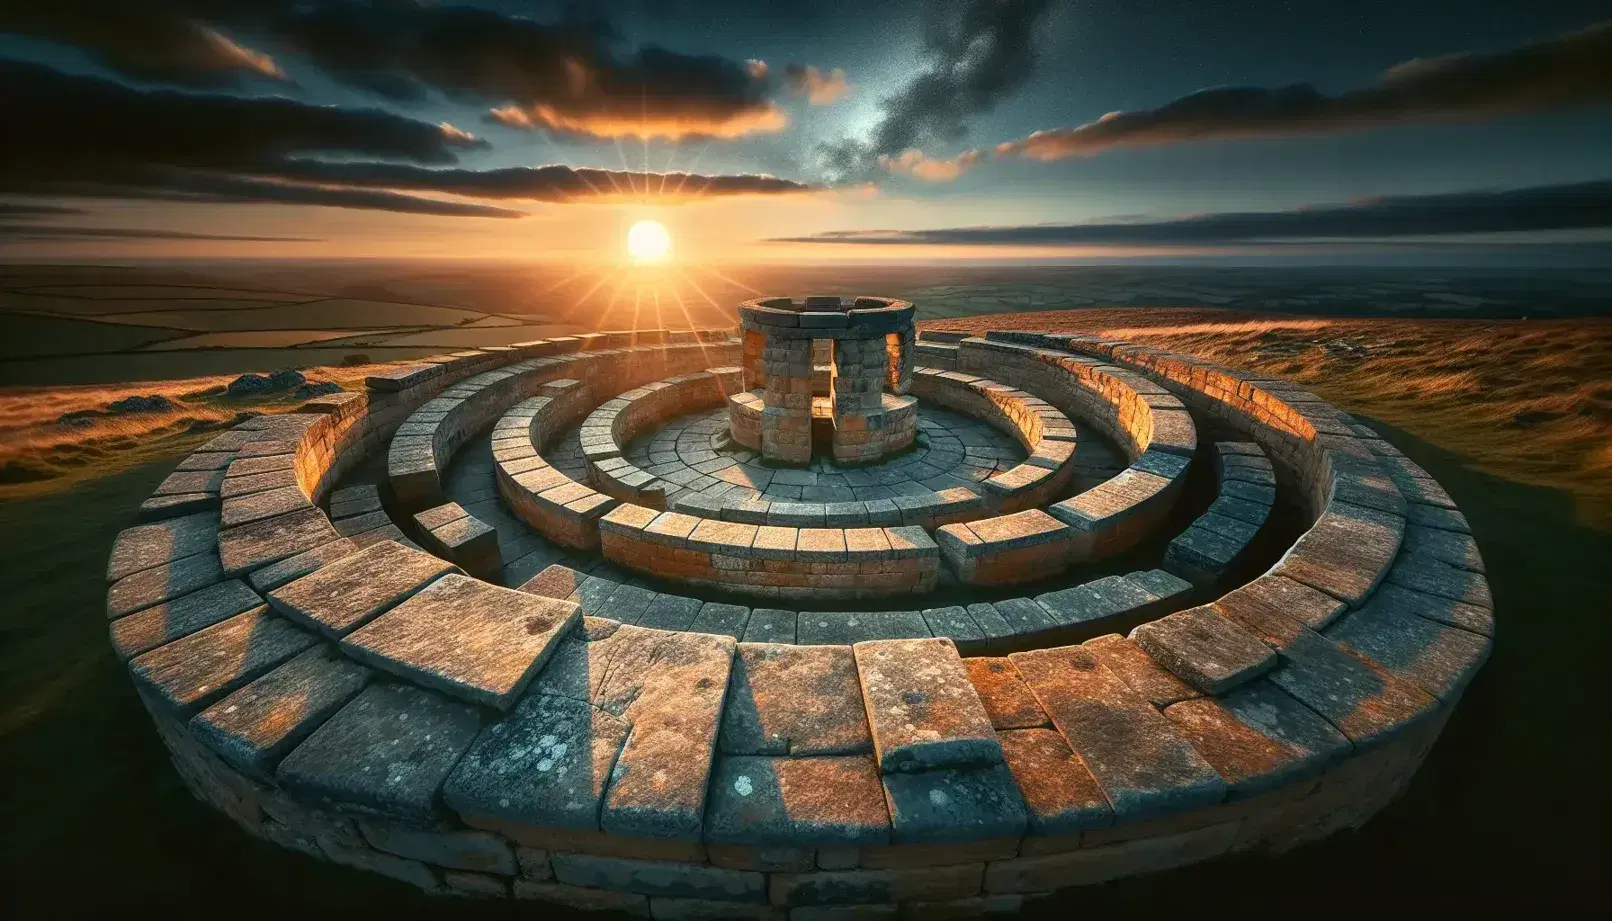 Ancient observatory-like historic structure with concentric circular walls and central platform at sunset, blurred sky and radiant sun.